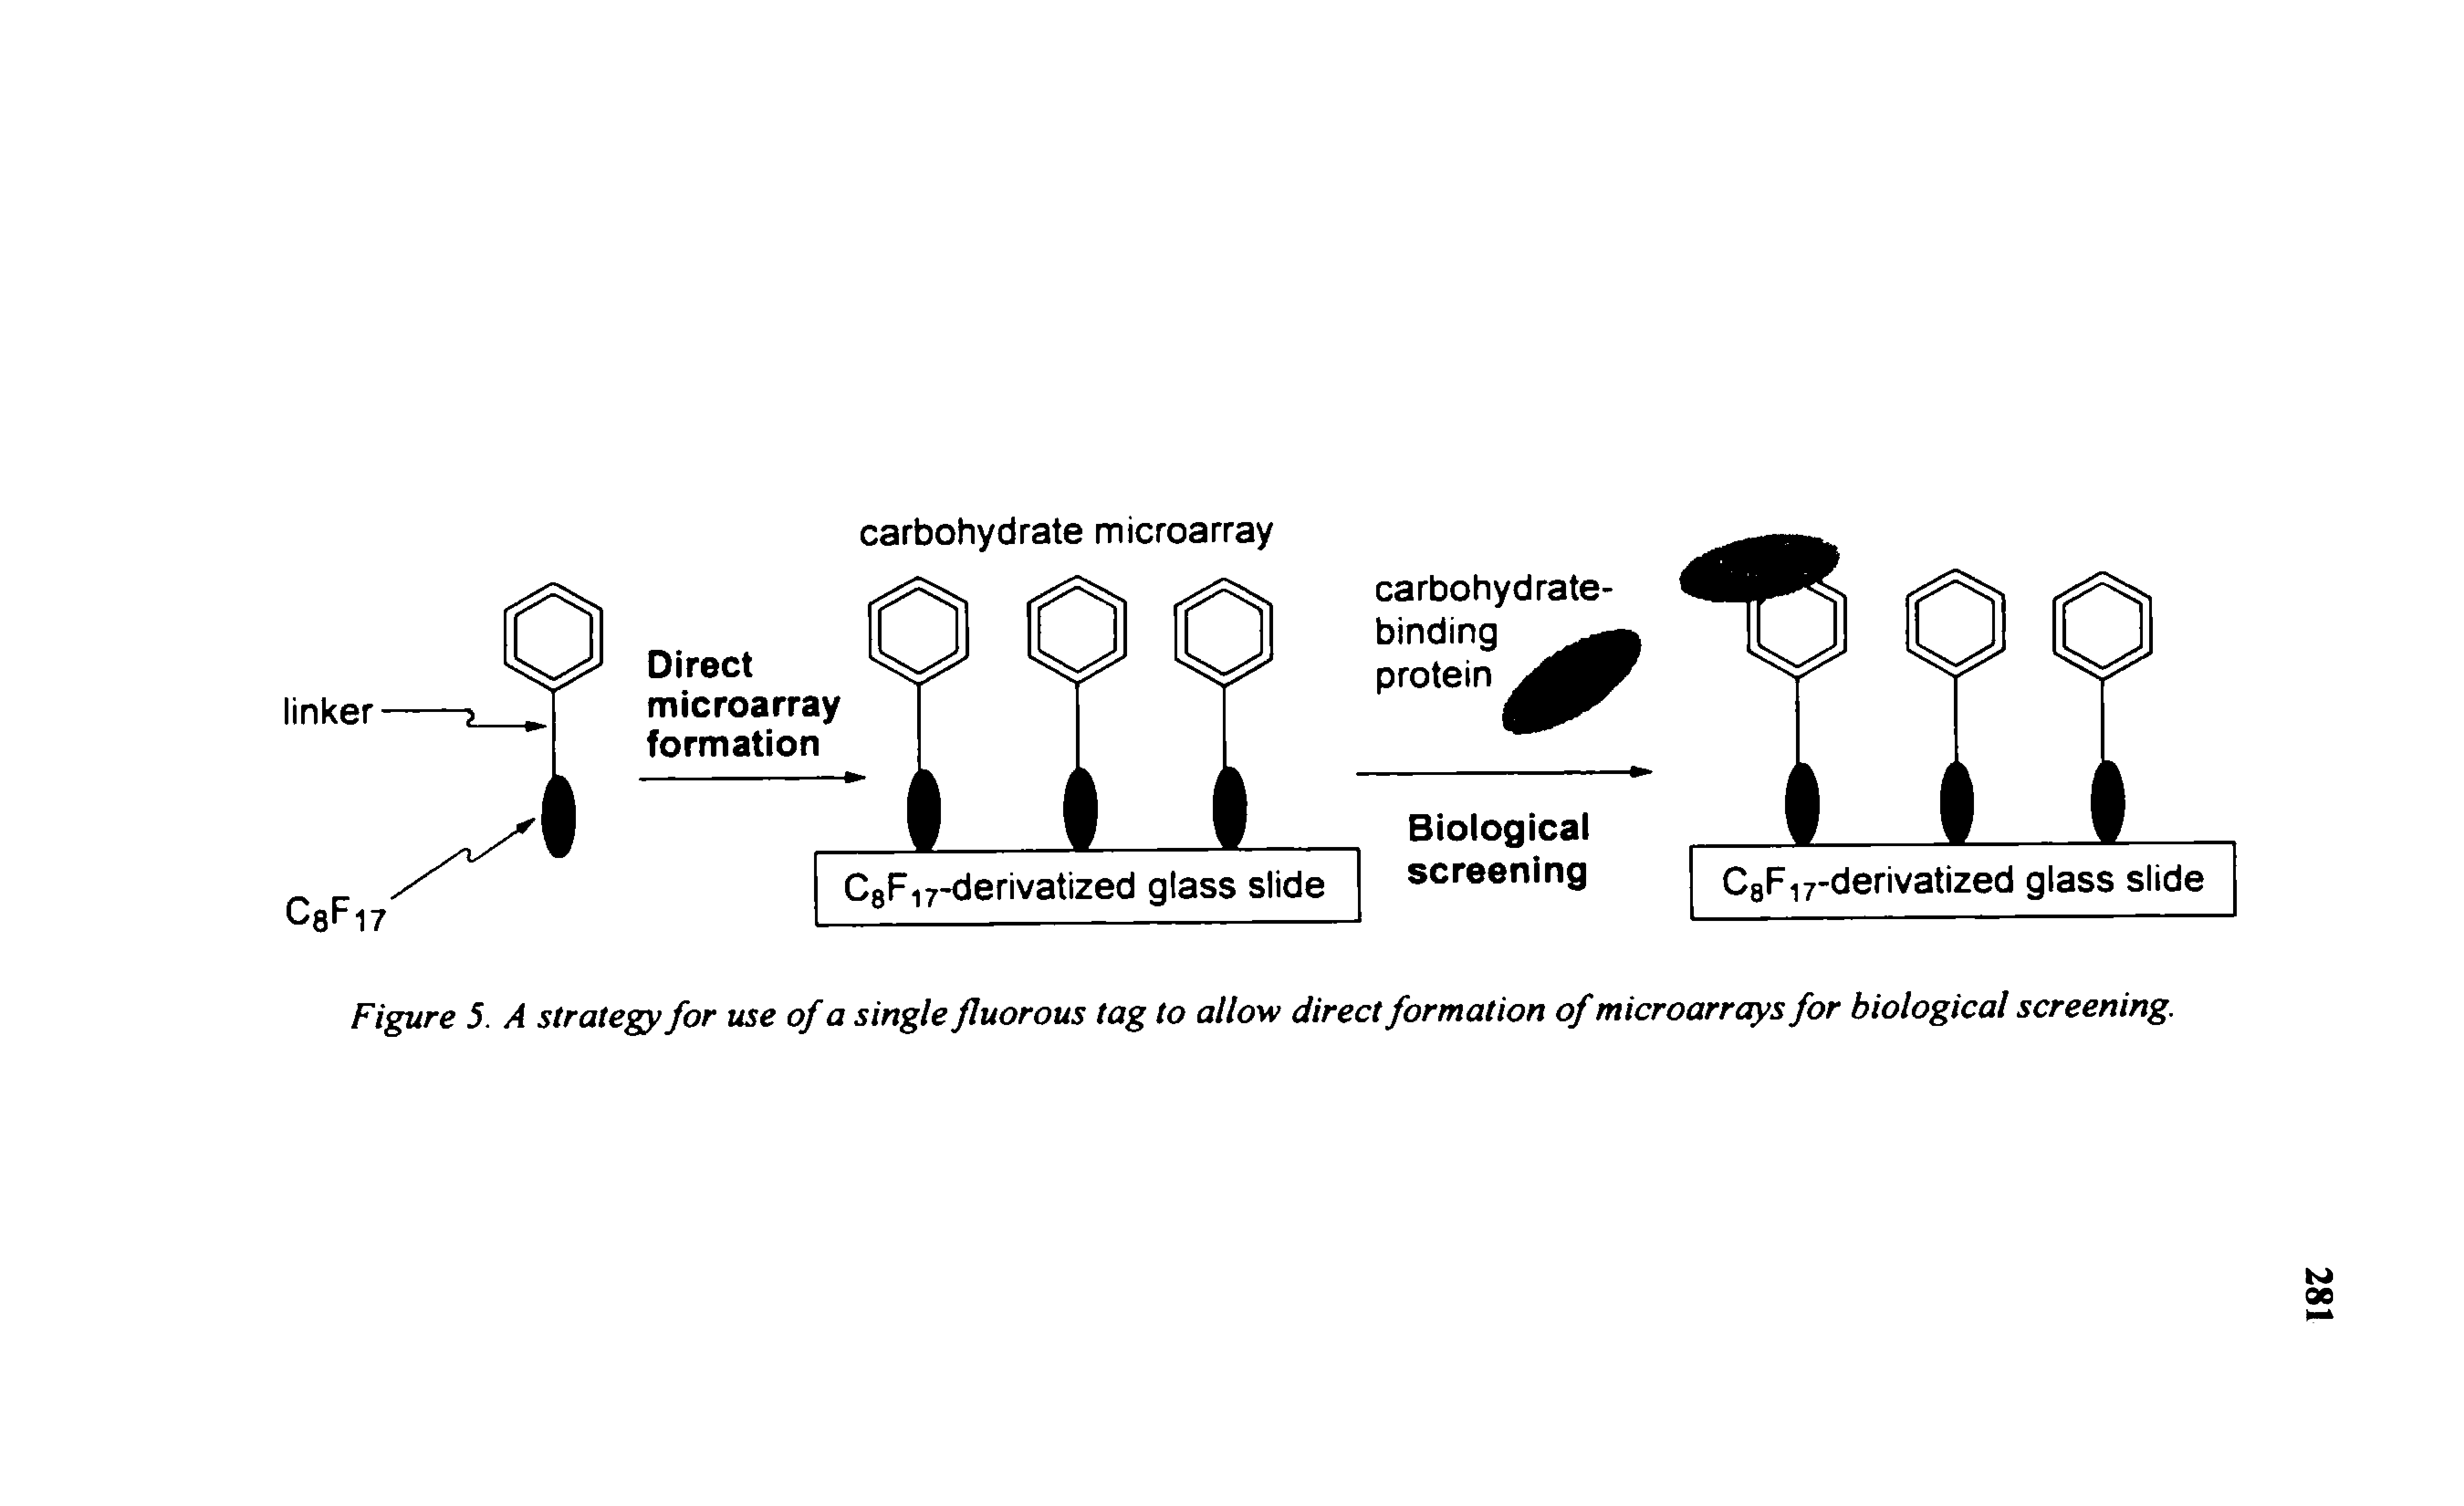 Figure 5. A strategy for use of a single fluorous tag to allow direct formation of microarrays for biological screening.